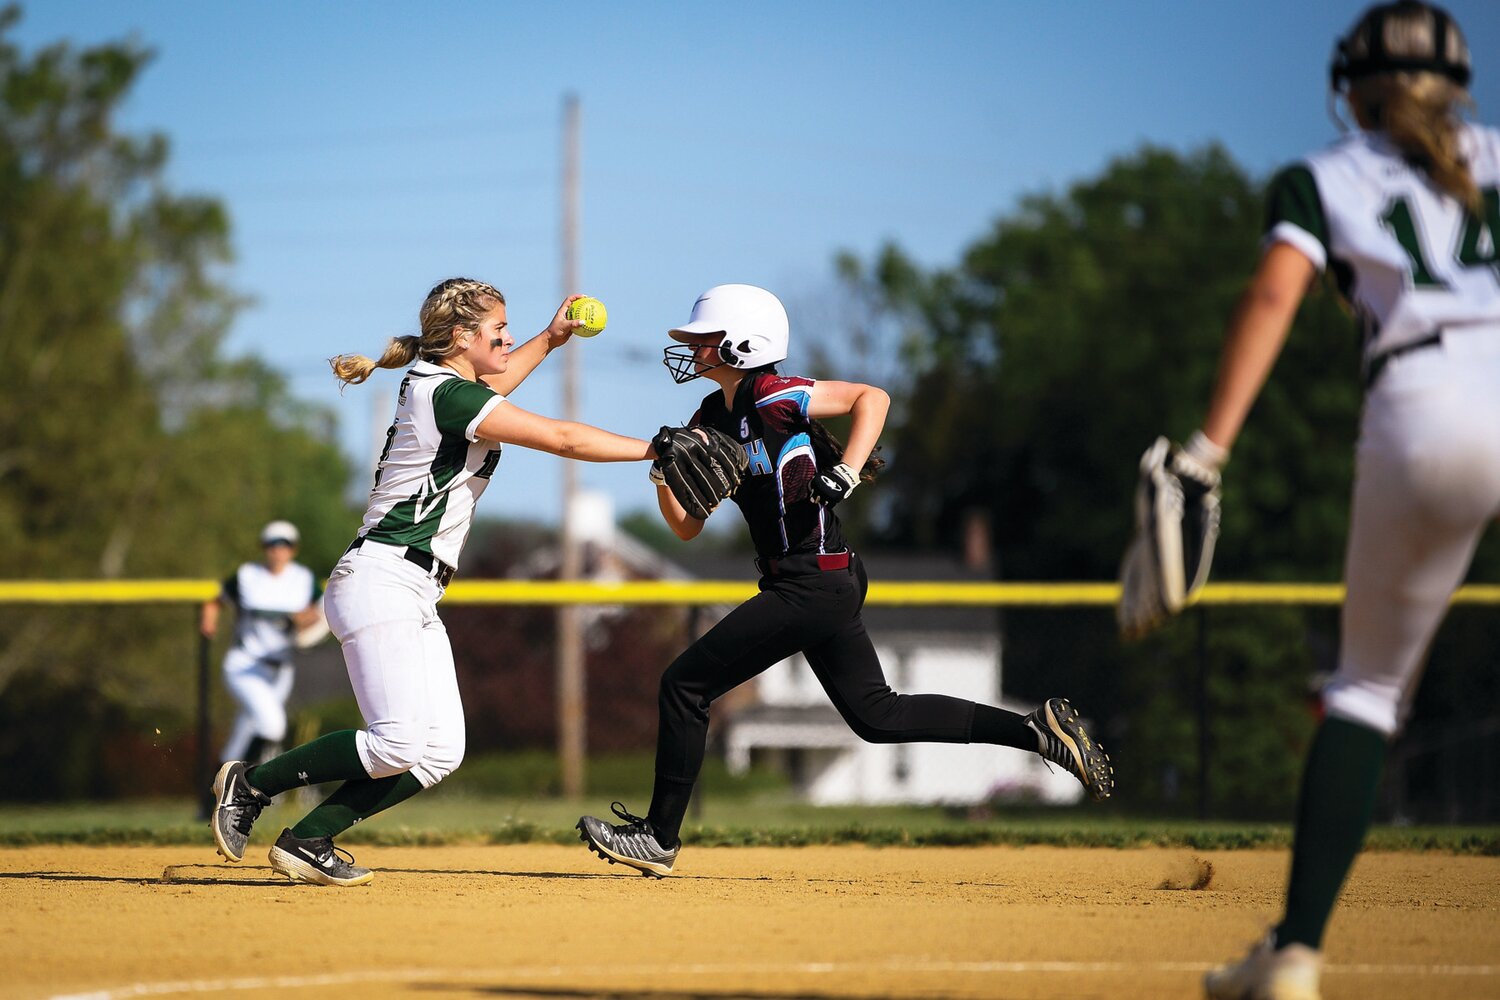 Dock Mennonite’s Trinity Landis makes a throw while Faith Christian’s Sammy Snyder advances during the top of the seventh inning.